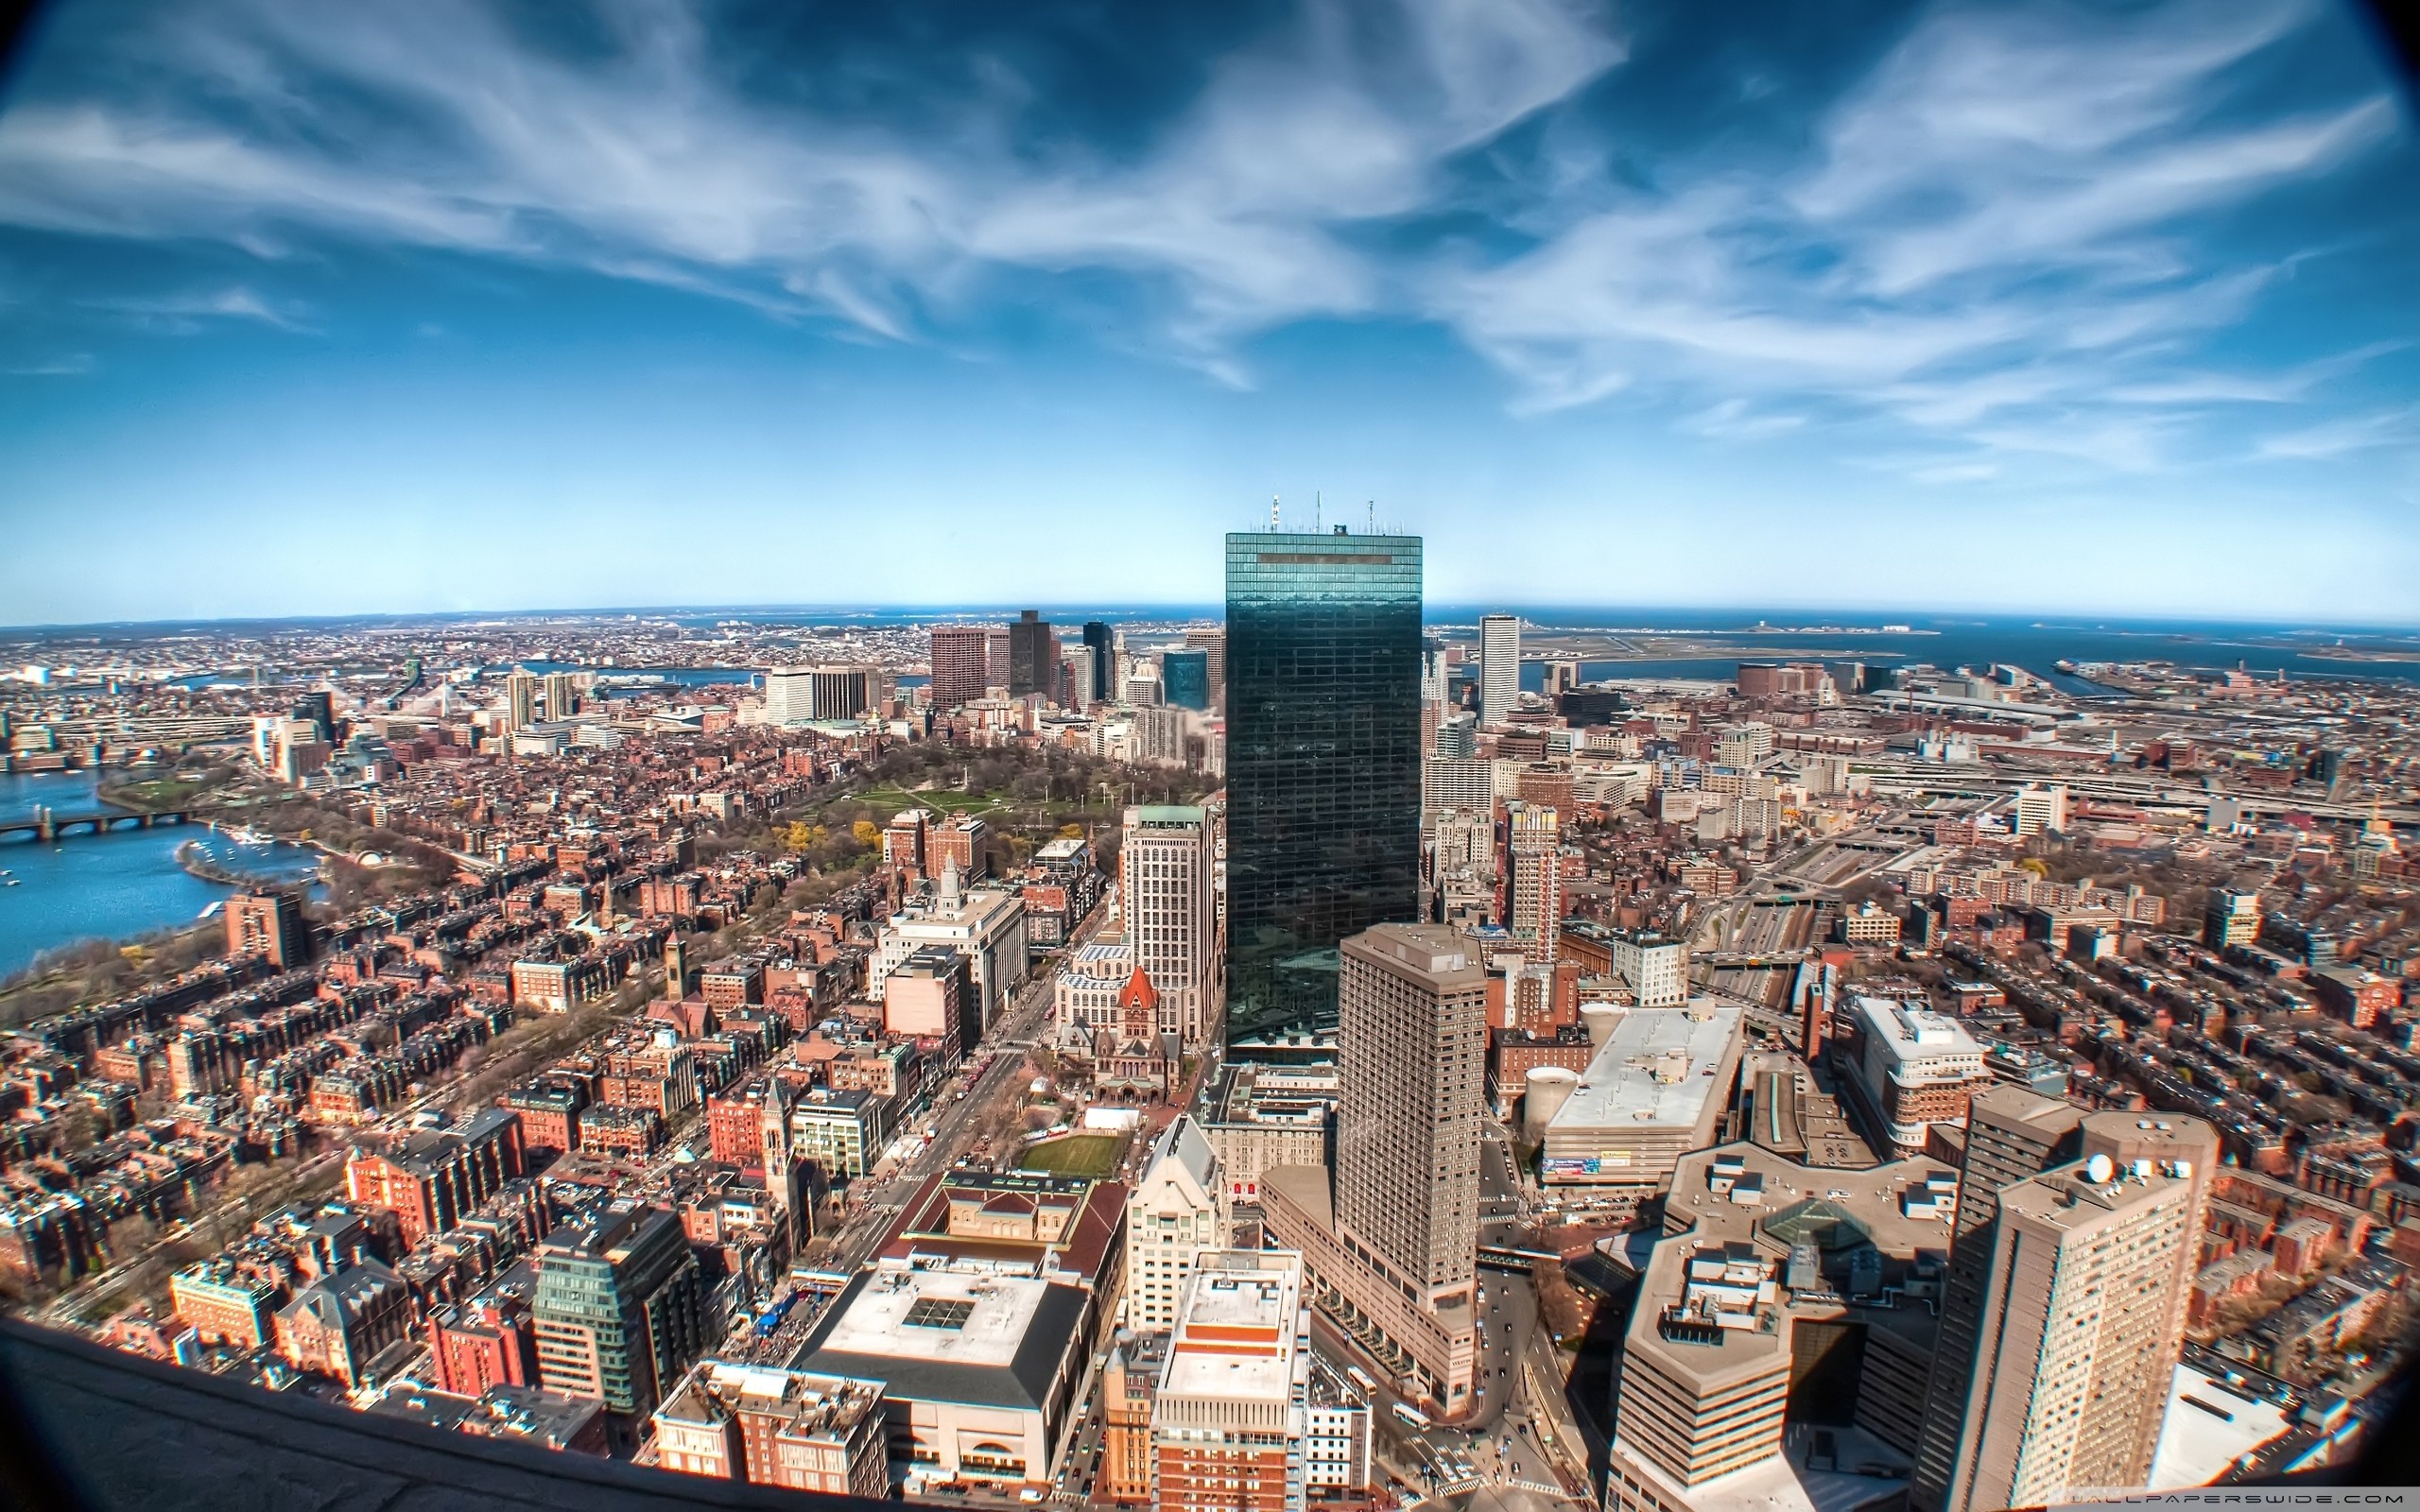 2560x1600 hd boston skyline images hd desktop wallpapers amazing images cool  background photos smart phone background photos free images widescreen high  quality ...